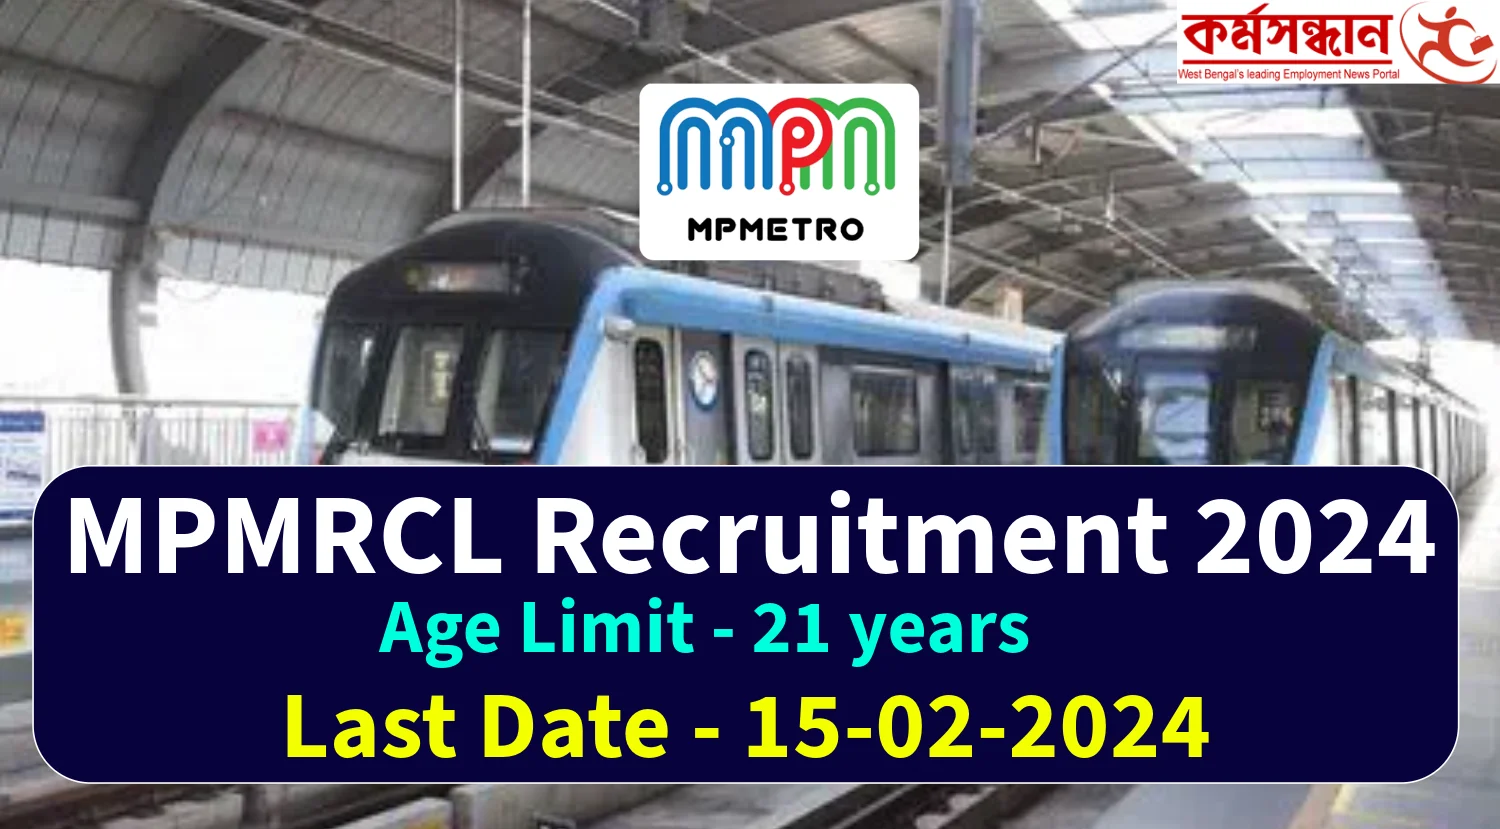 MPMRCL Recruitment 2024 Notification out under Various Engineer Disciplines